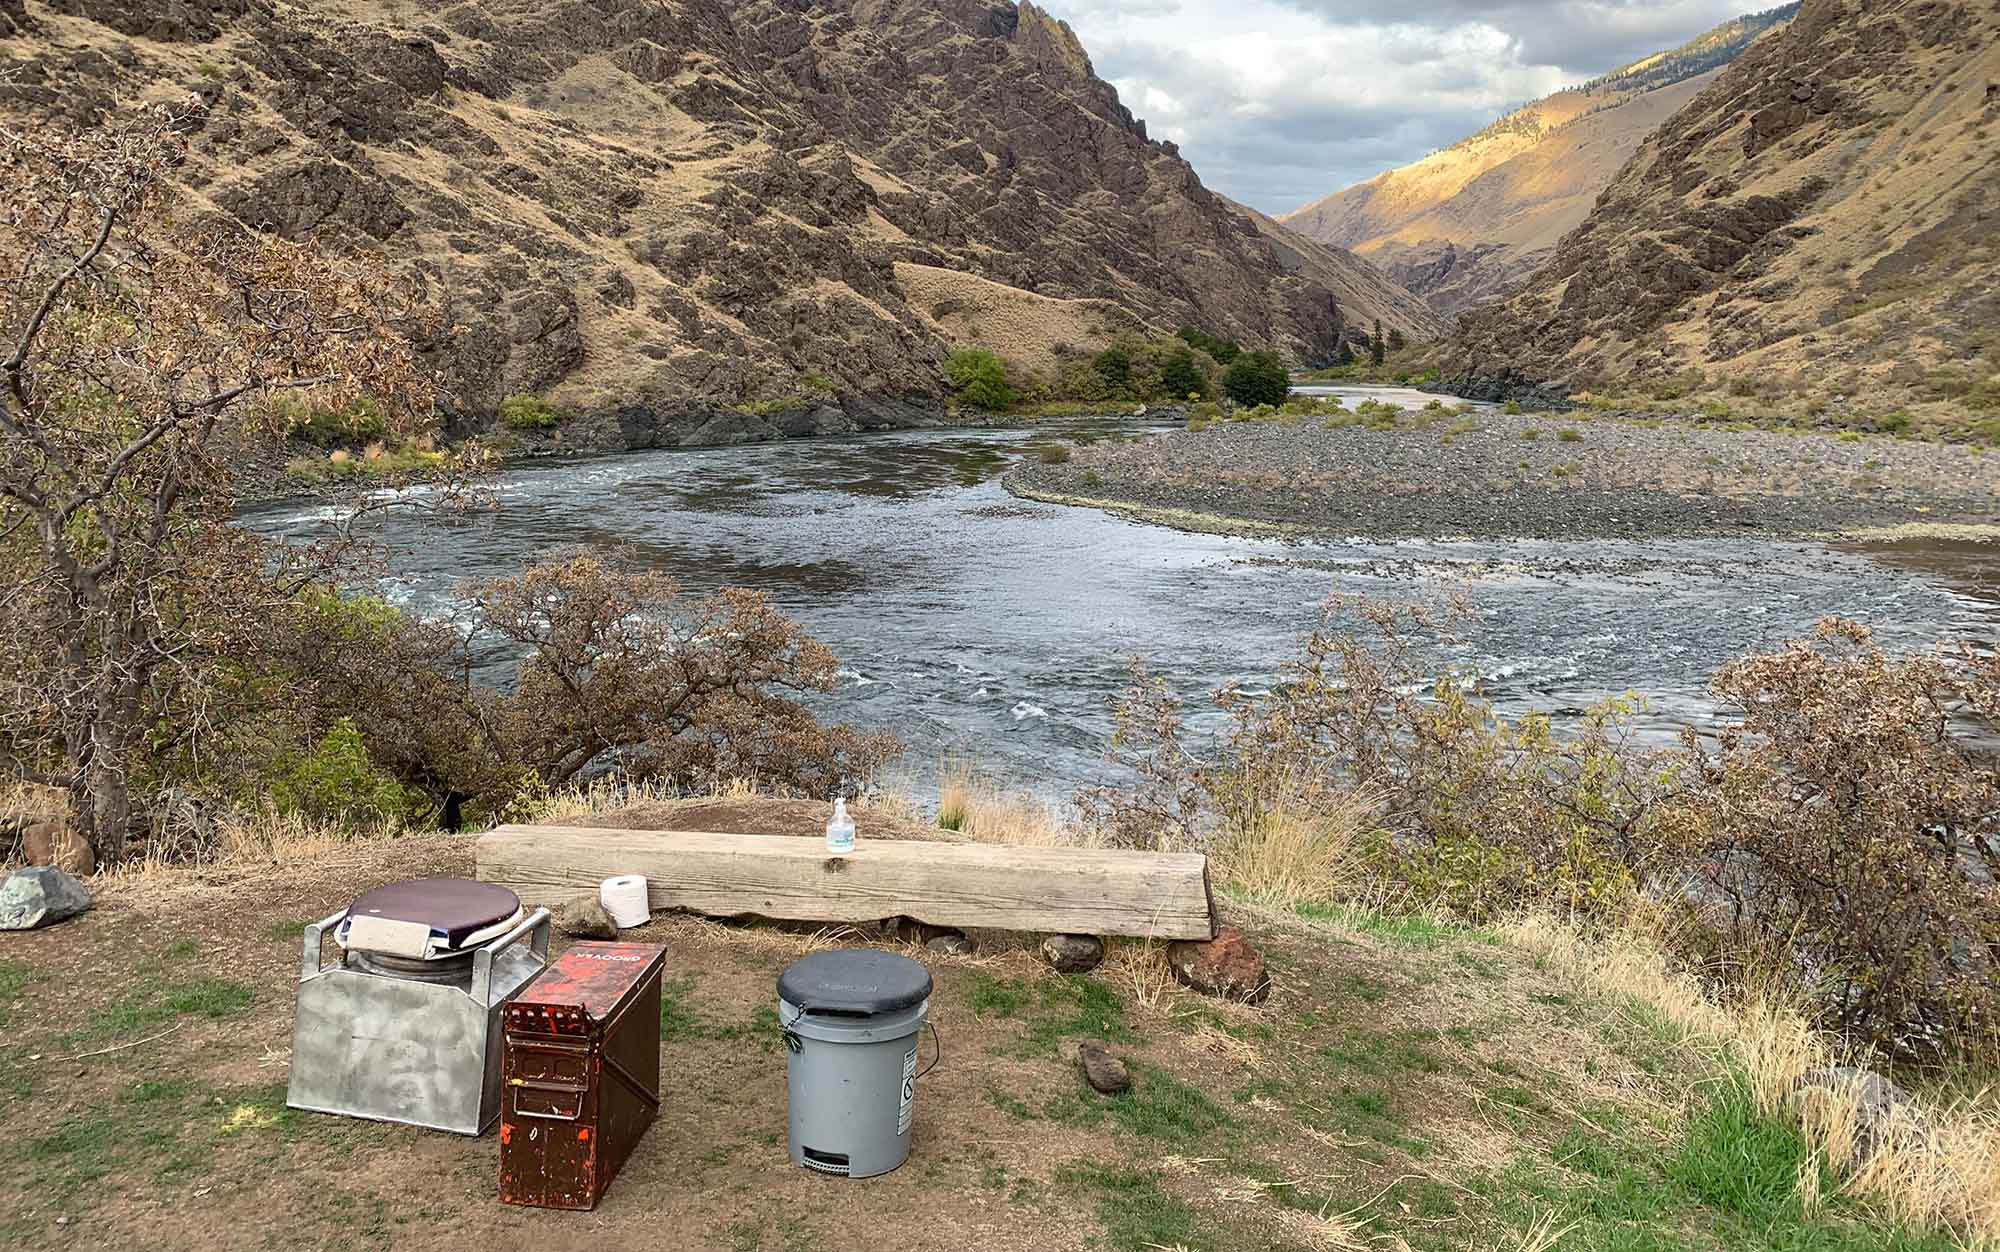 A scenic groover location on the Snake River.